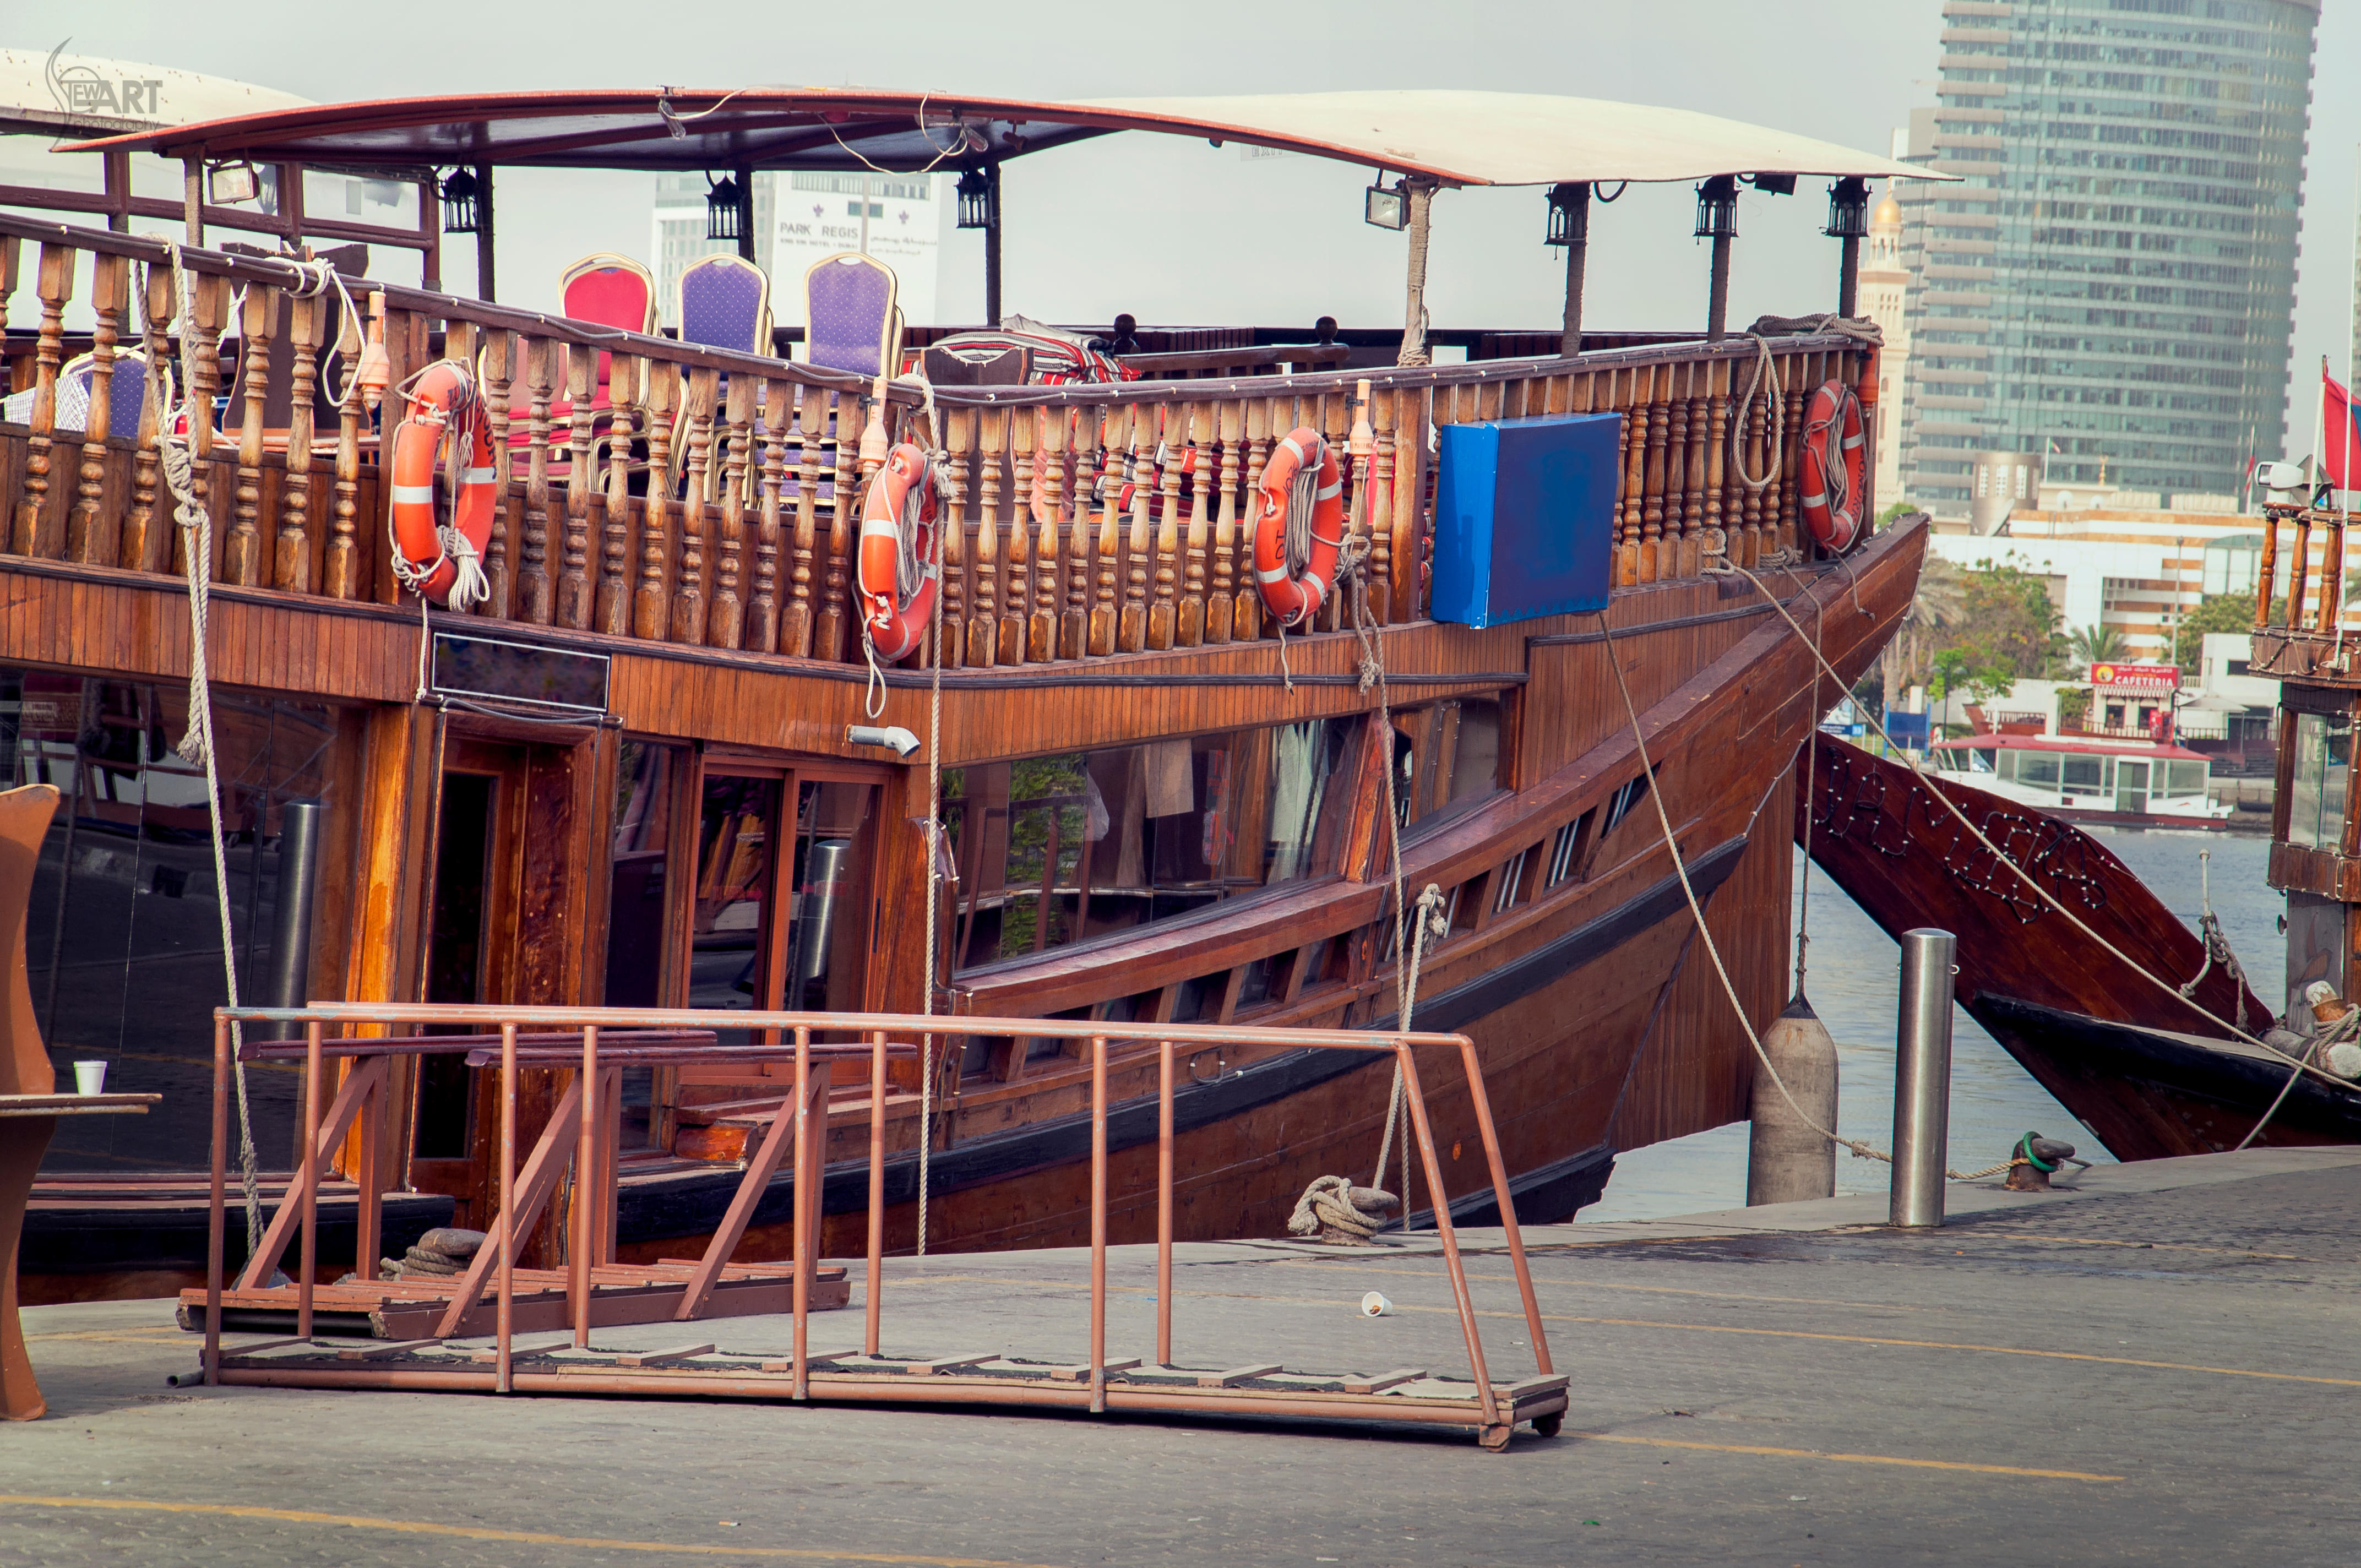 Dhow Cruise at the harbor in Dubai